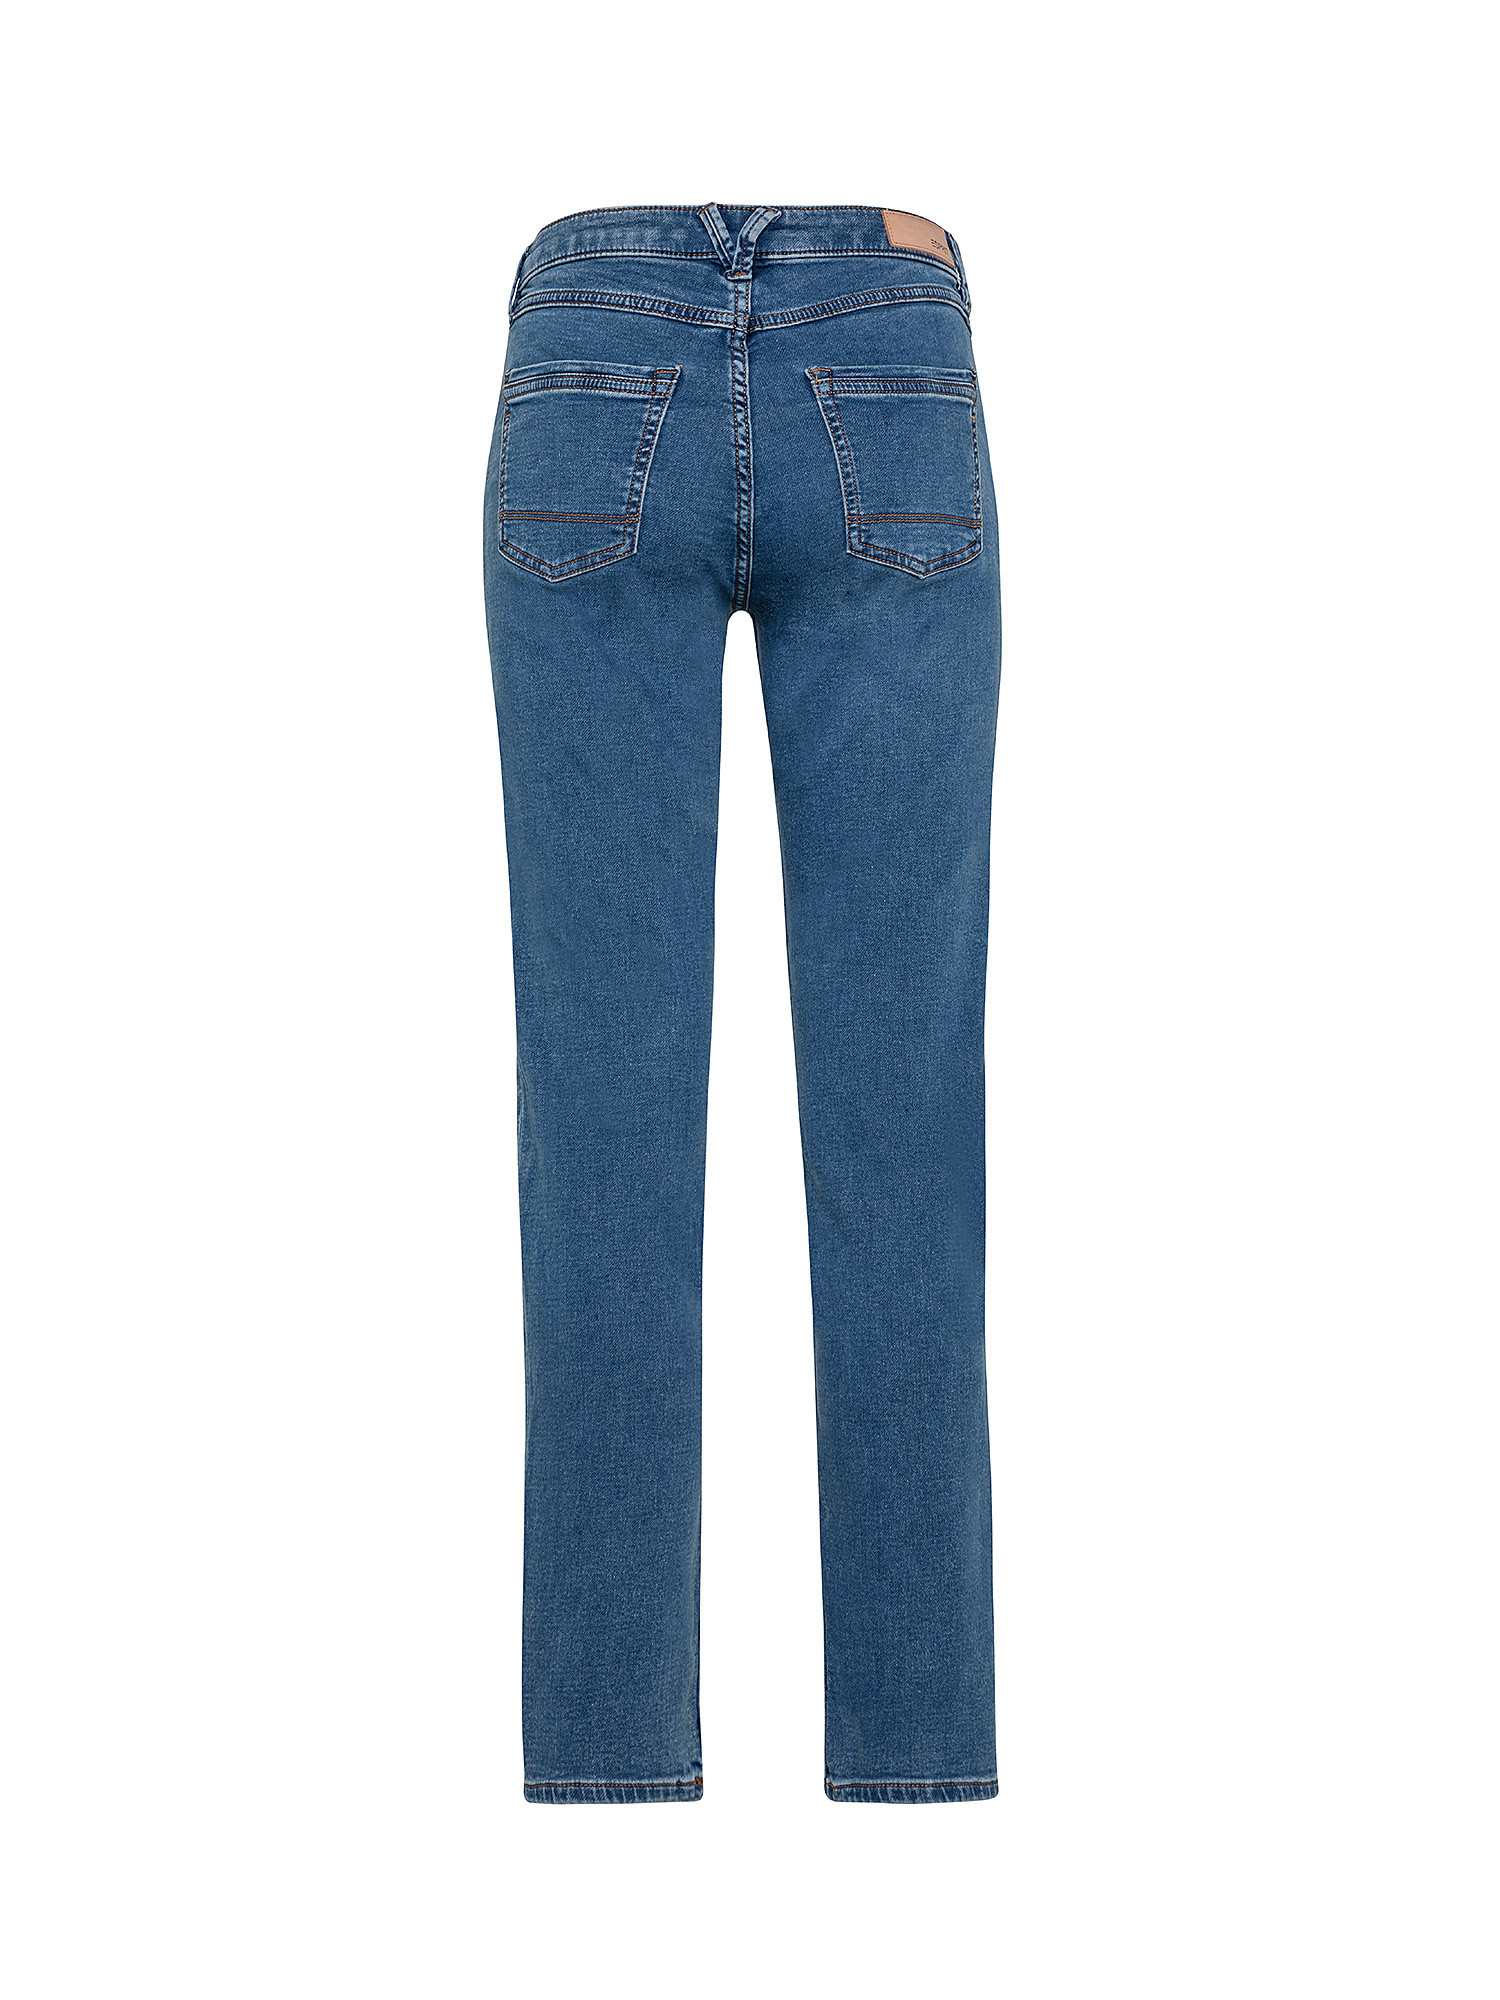 Stretch jeans in organic cotton blend, Blue, large image number 1